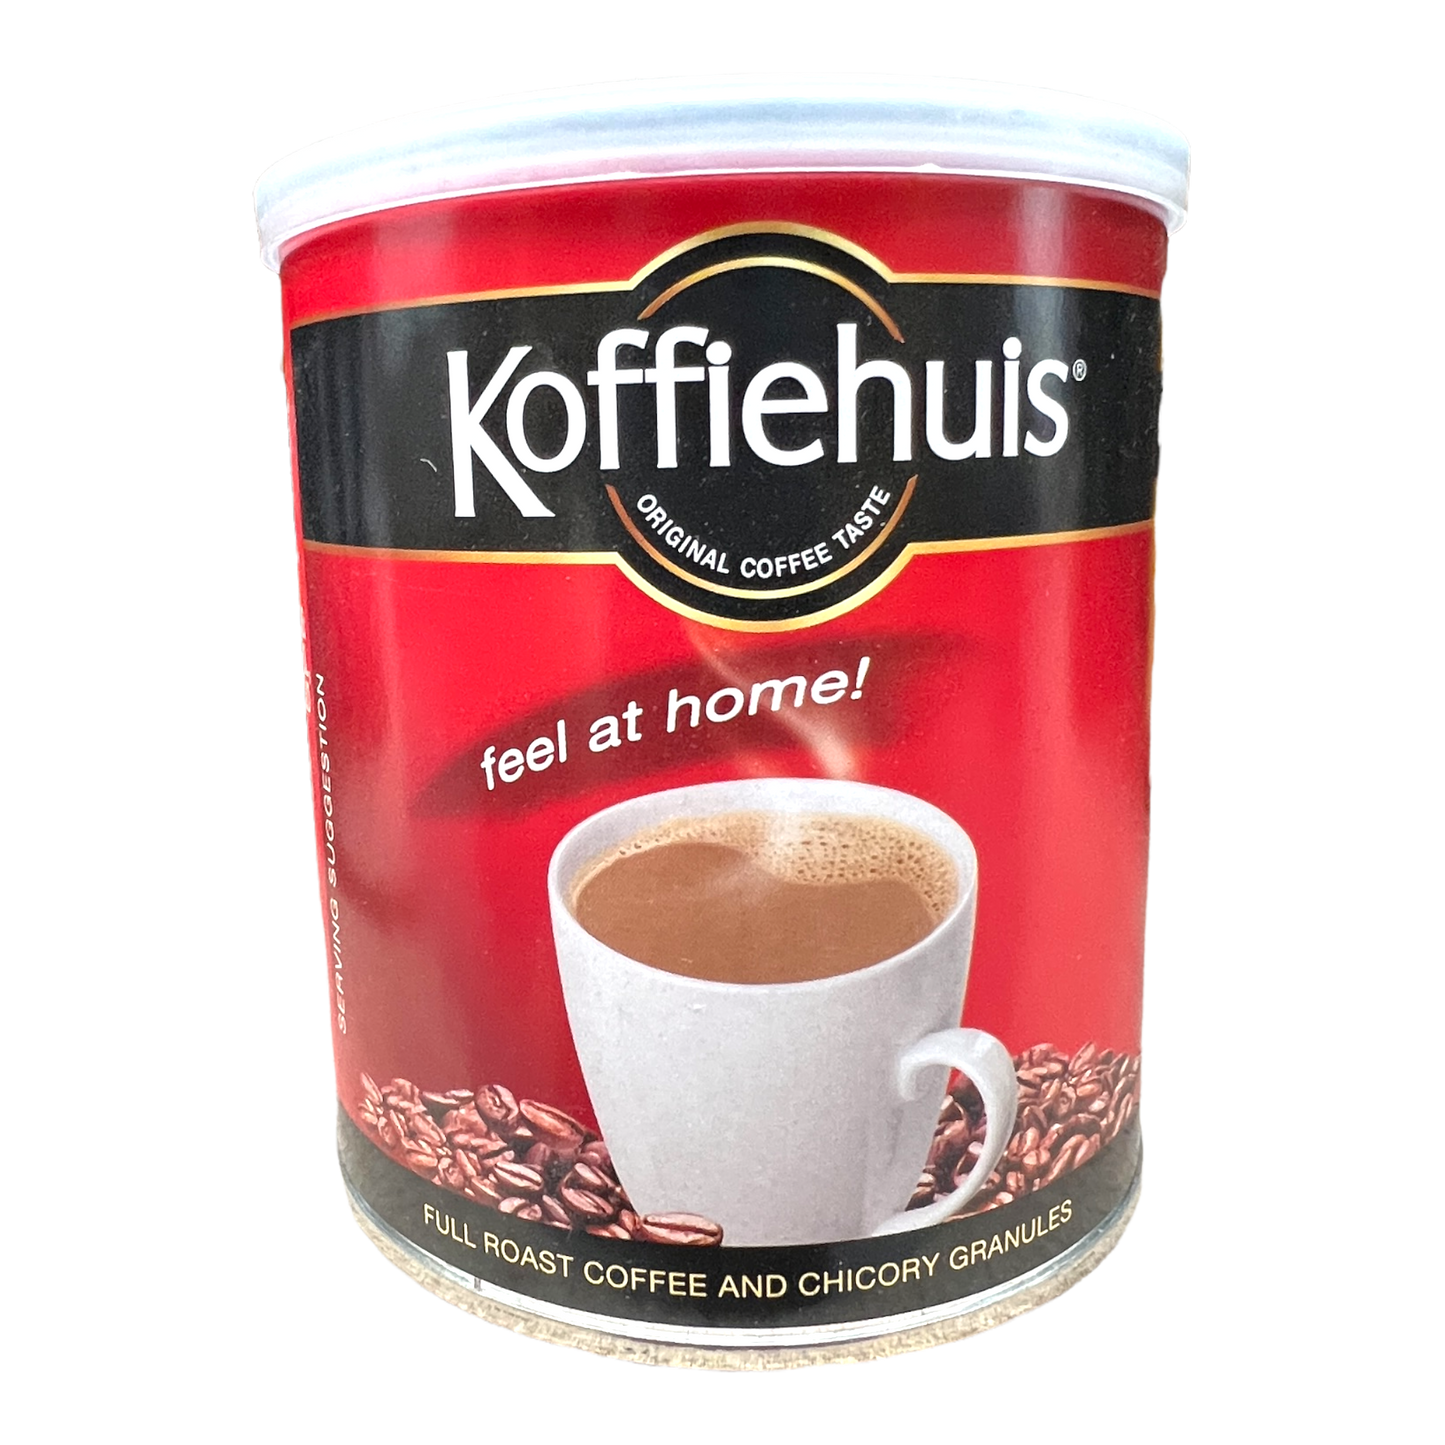 Koffiehuis Full Roast Coffee and Chicory Granules 250g [South African]